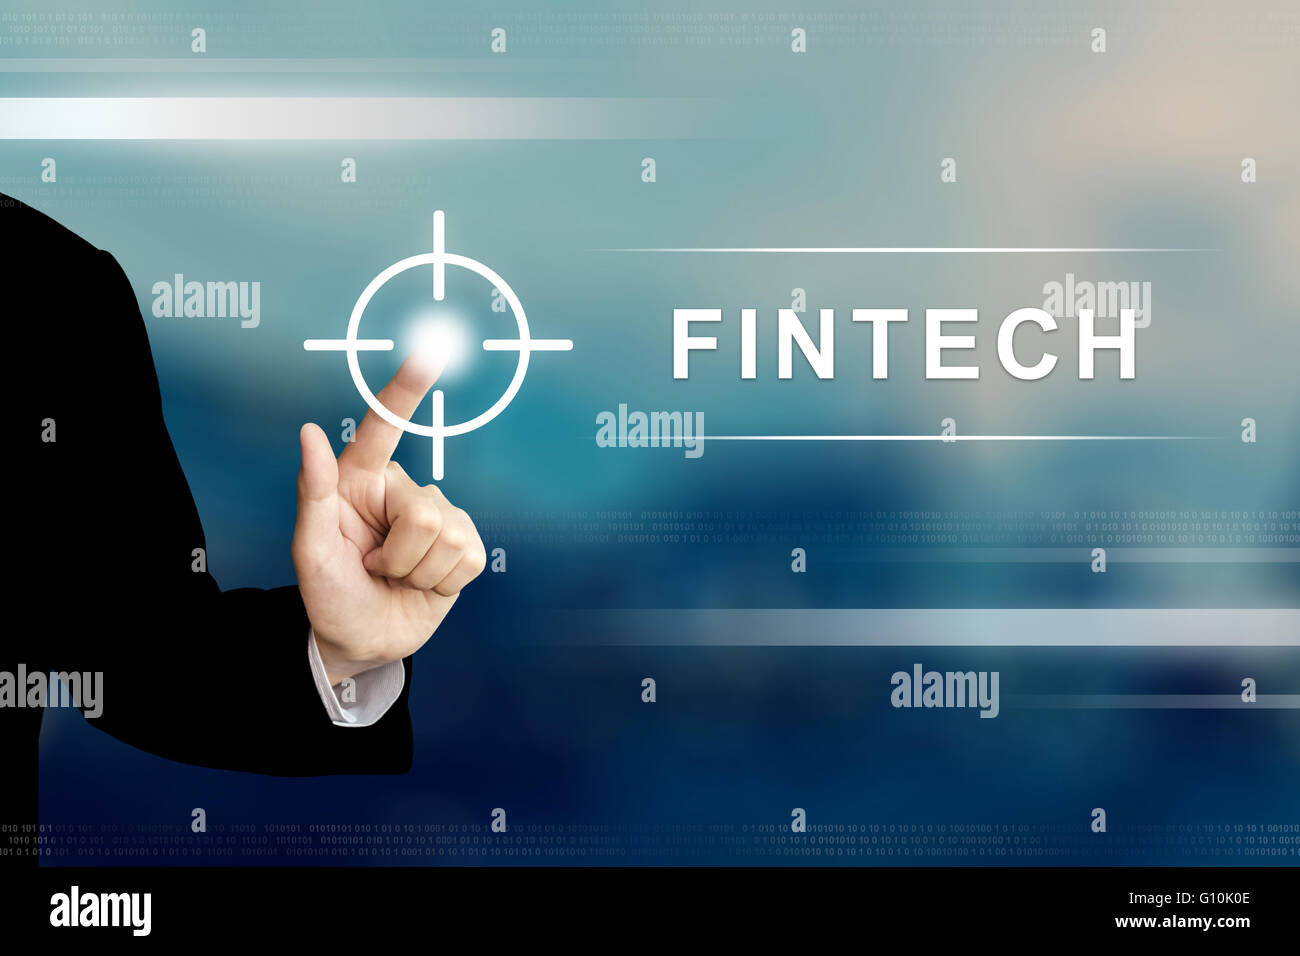 business hand pushing fintech or financial technology button on a touch screen interface Stock Photo